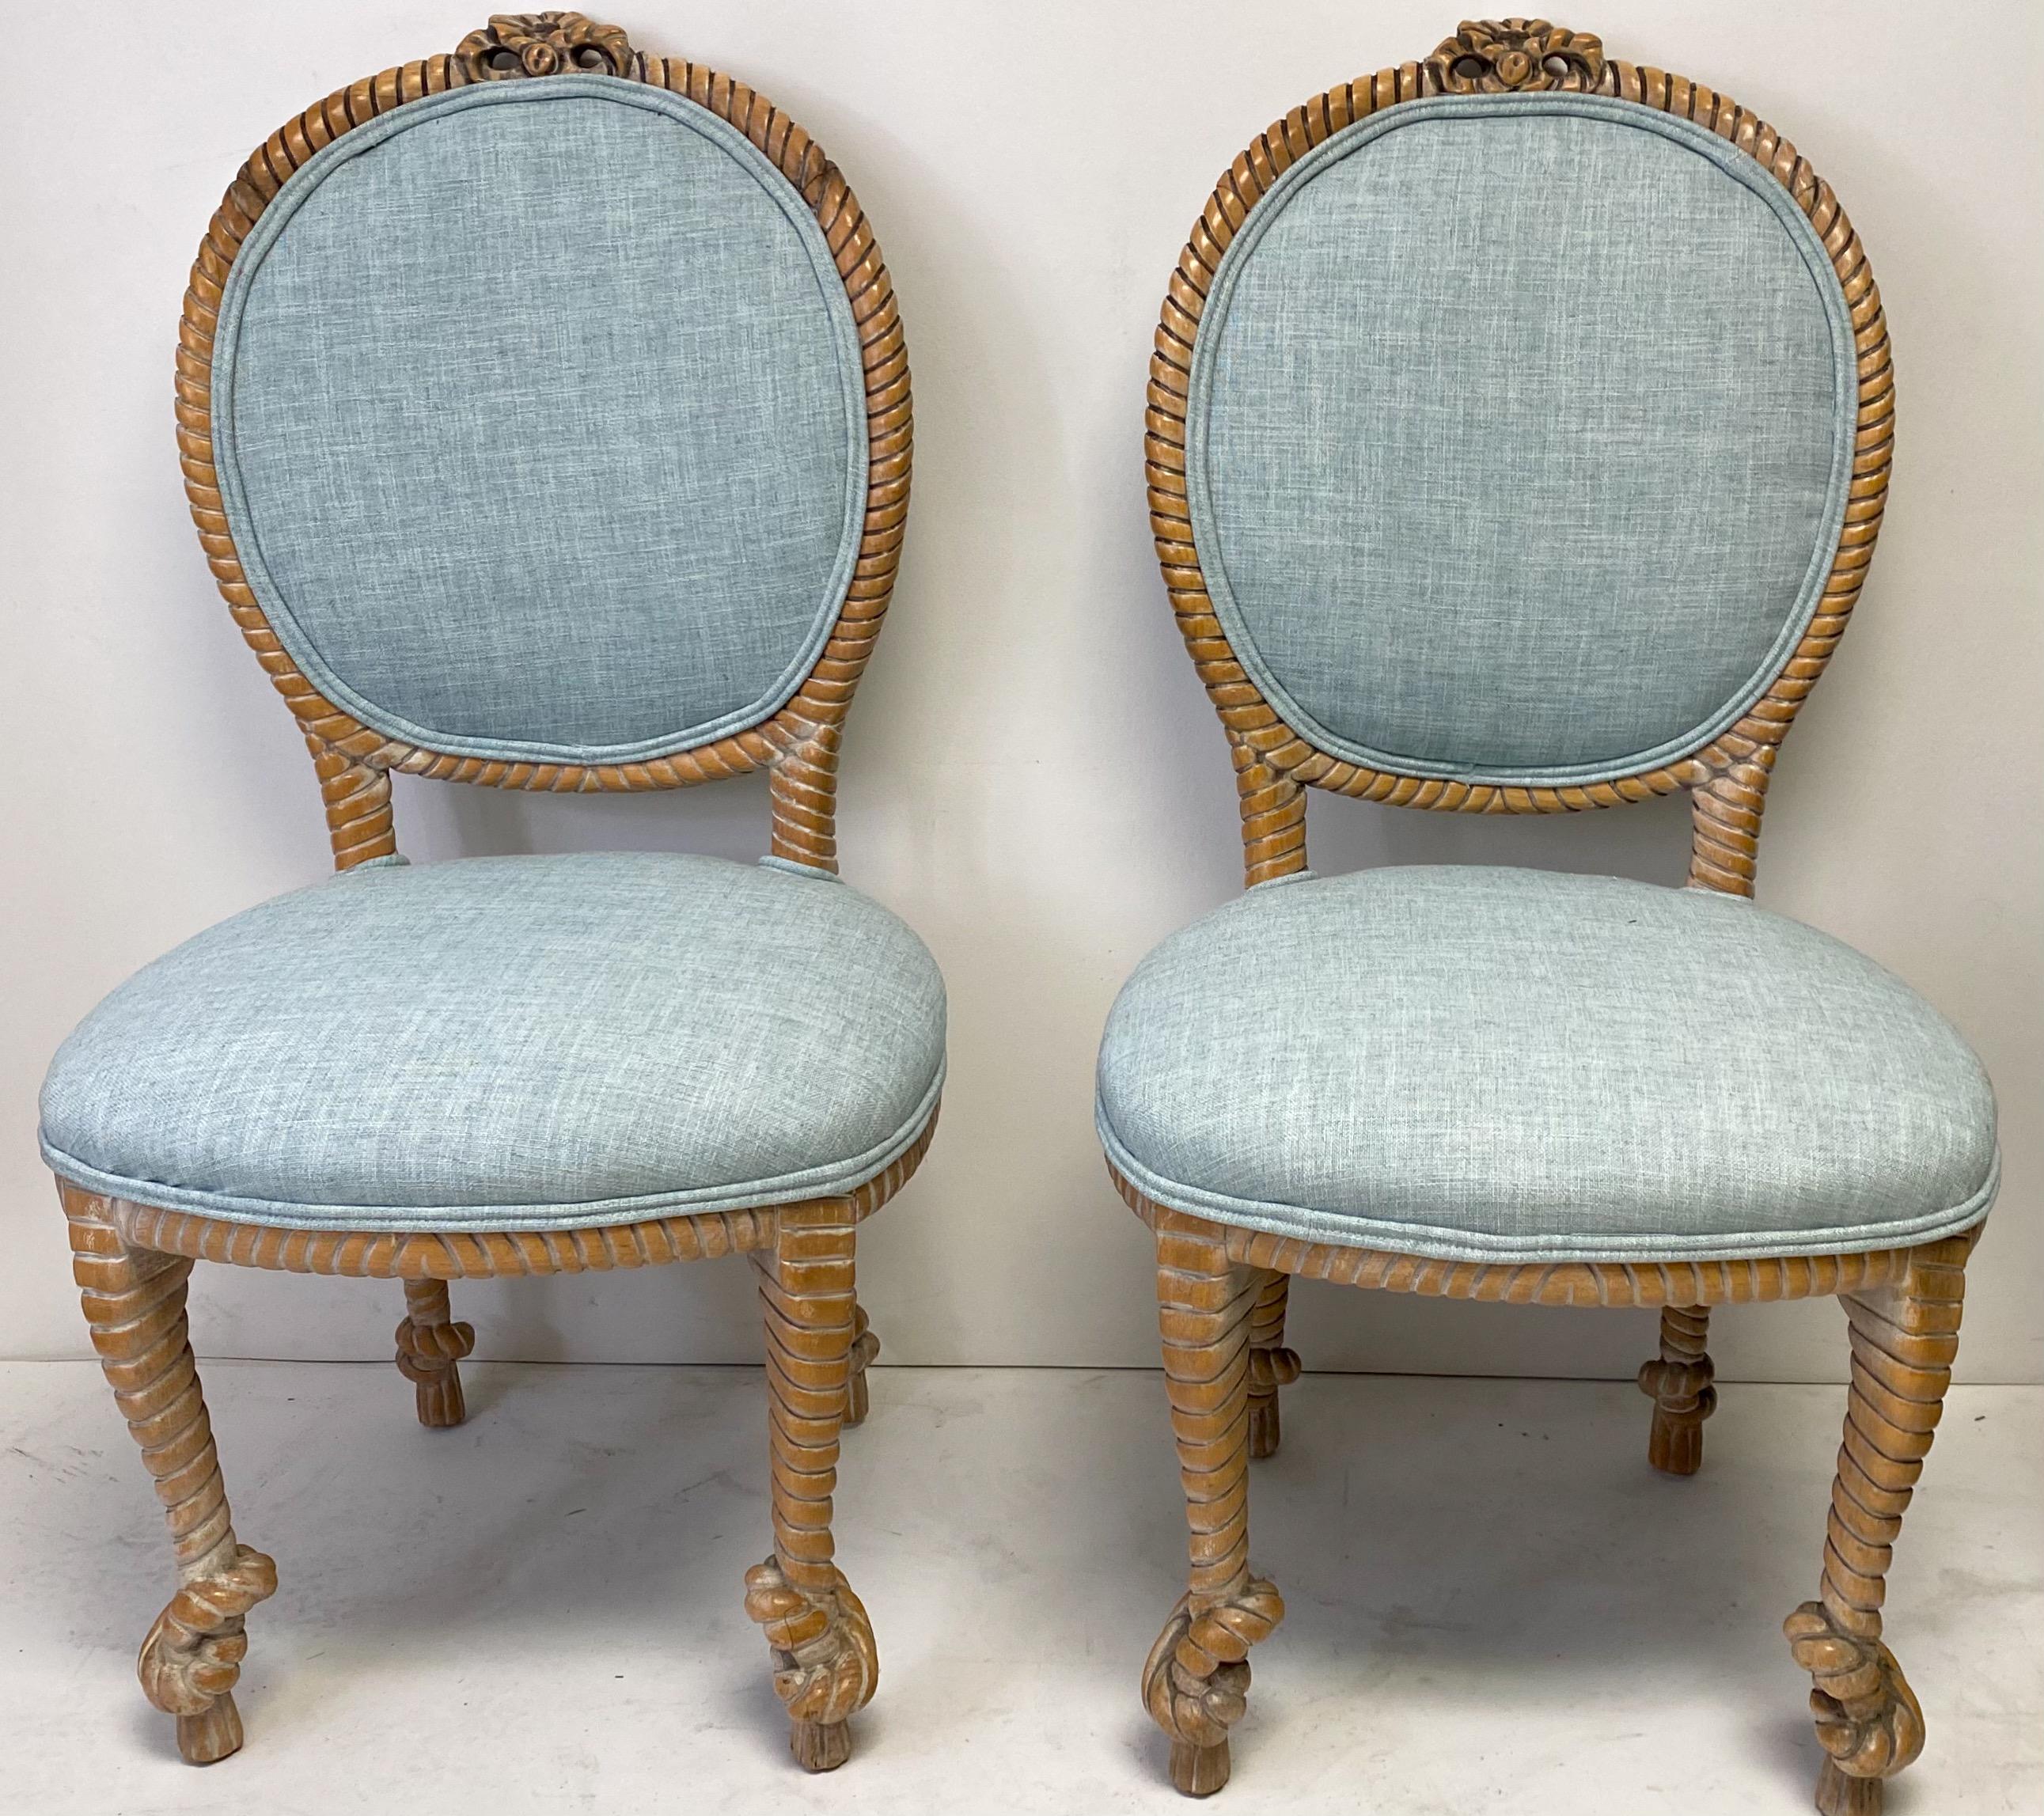 This is a pair of carved oak regency style rope side chairs by Baker Furniture Company. The turquoise linen upholstery is new. They are marked, and the frames do show some lite wear.